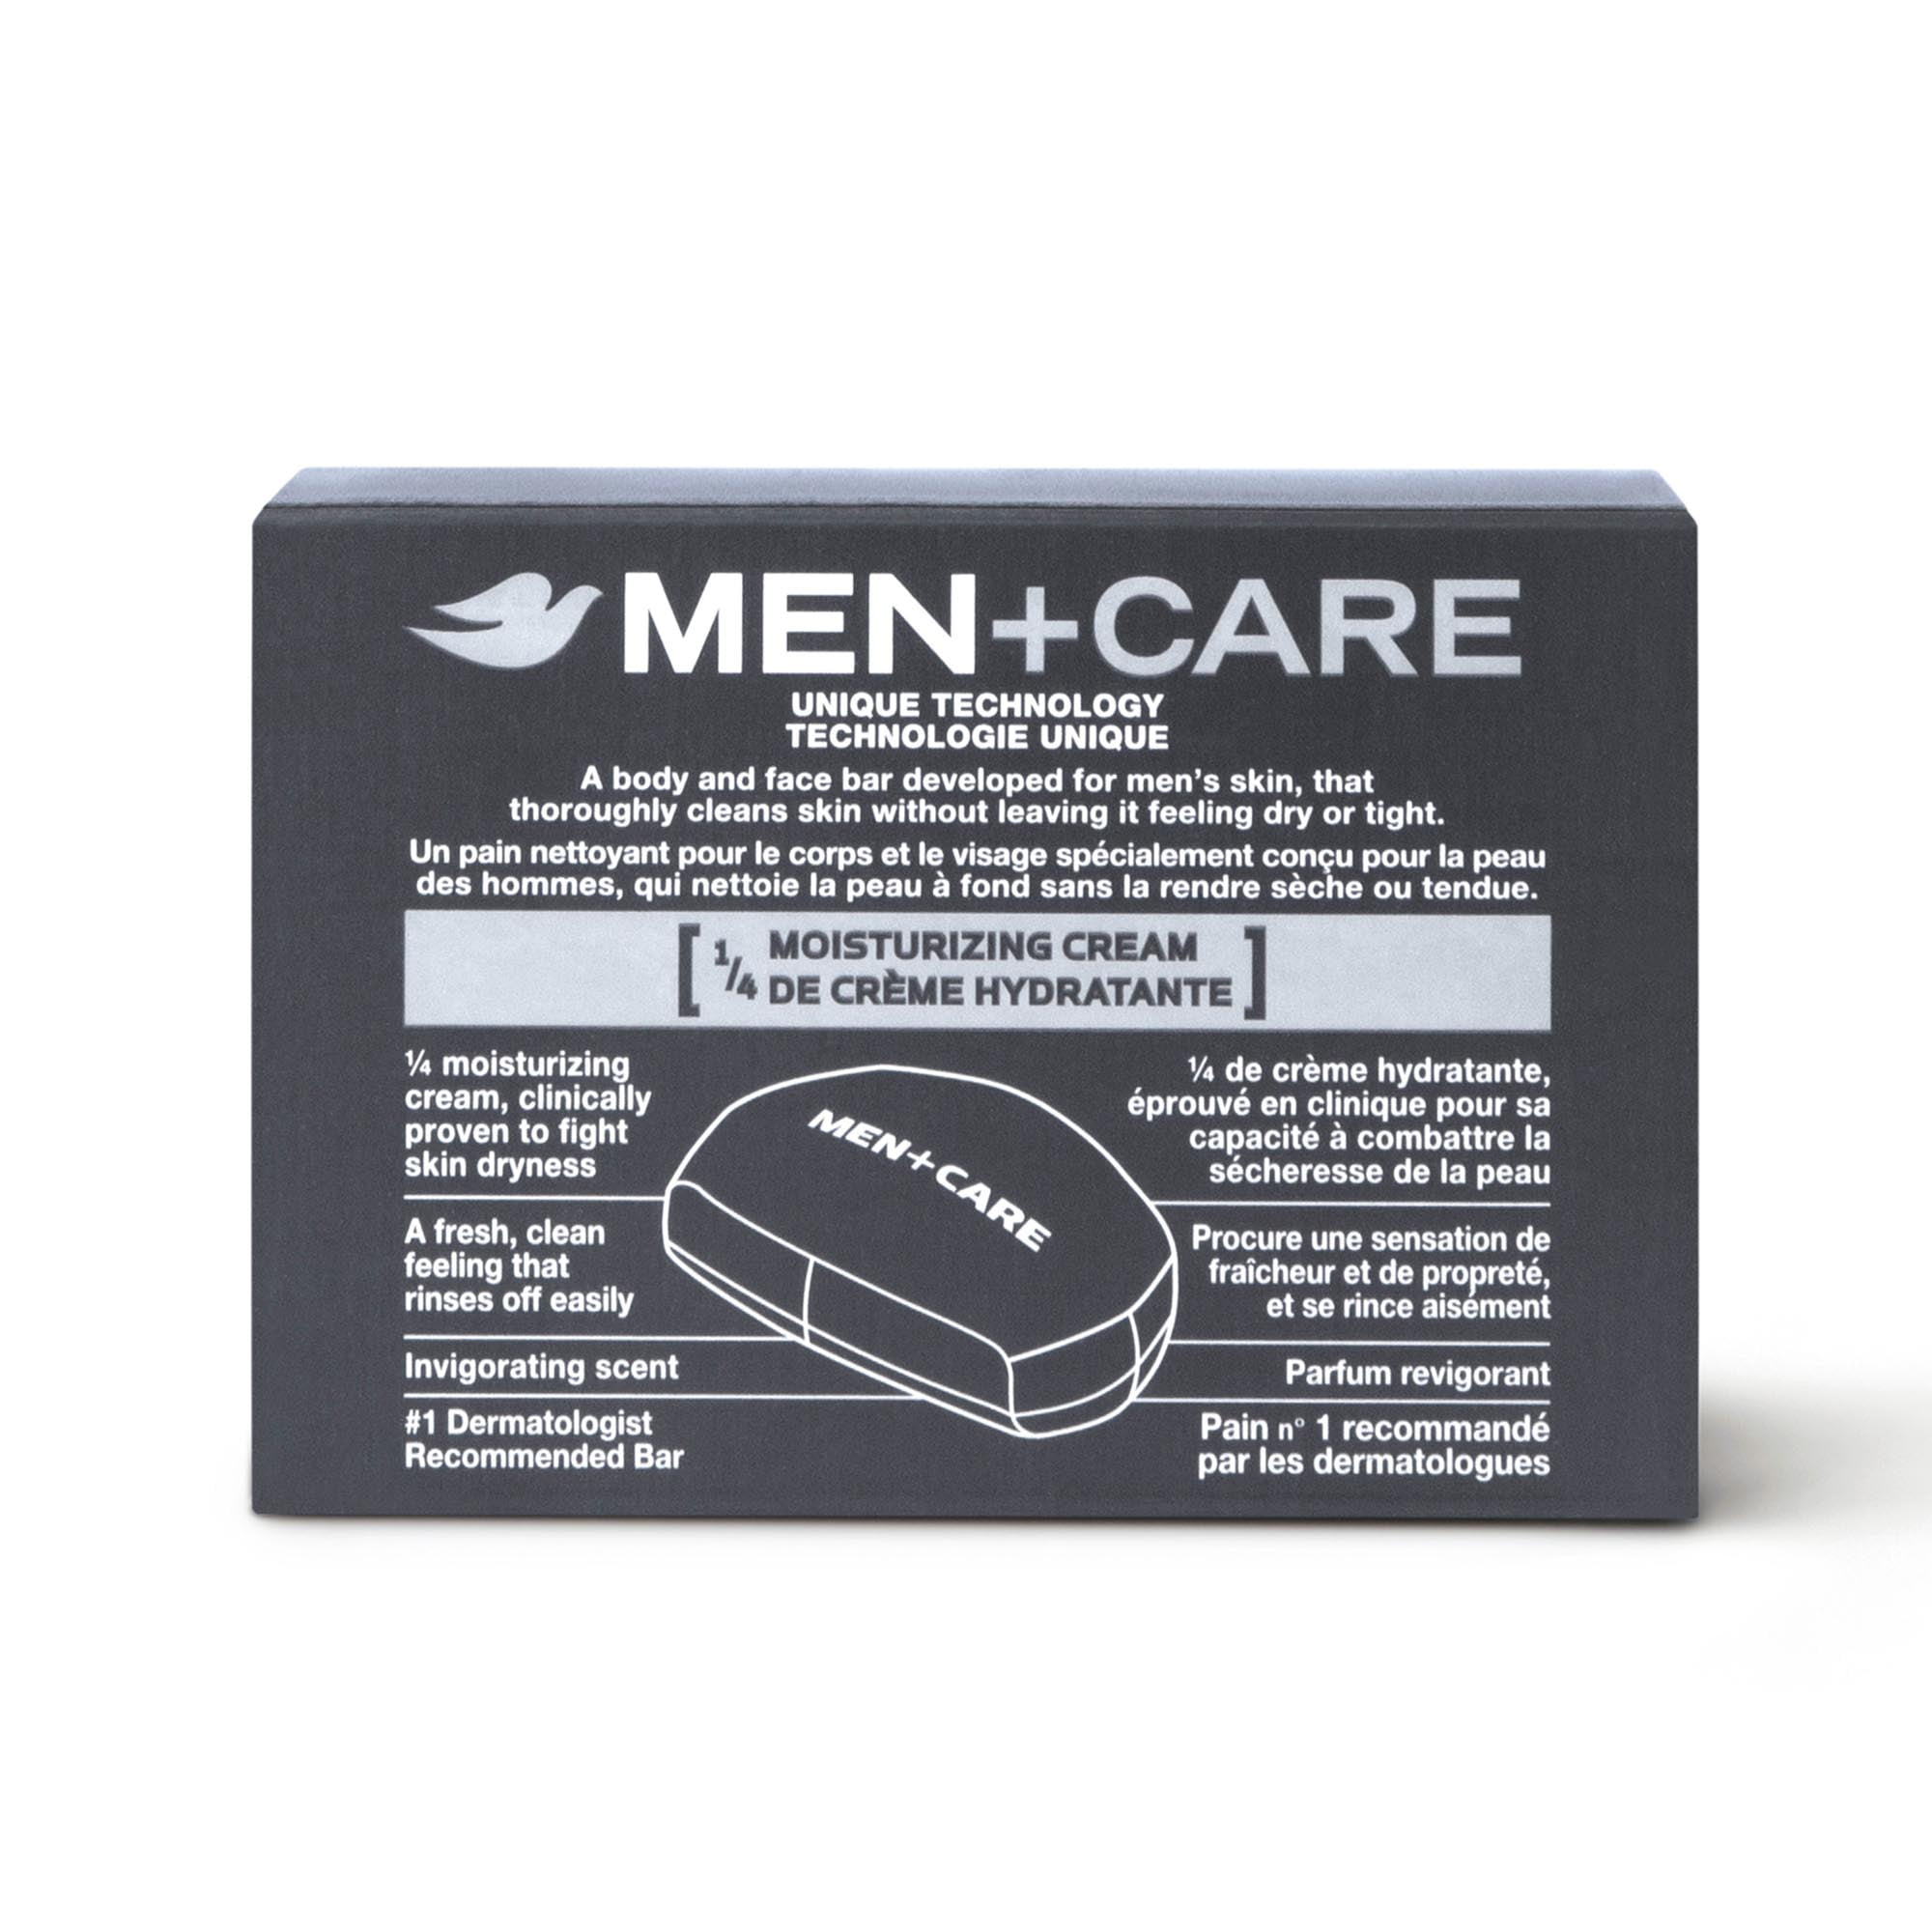 Soap Dove® Men+Care Bar 3.75 oz. Individually Wrapped Extra Fresh Scent -  Suprememed